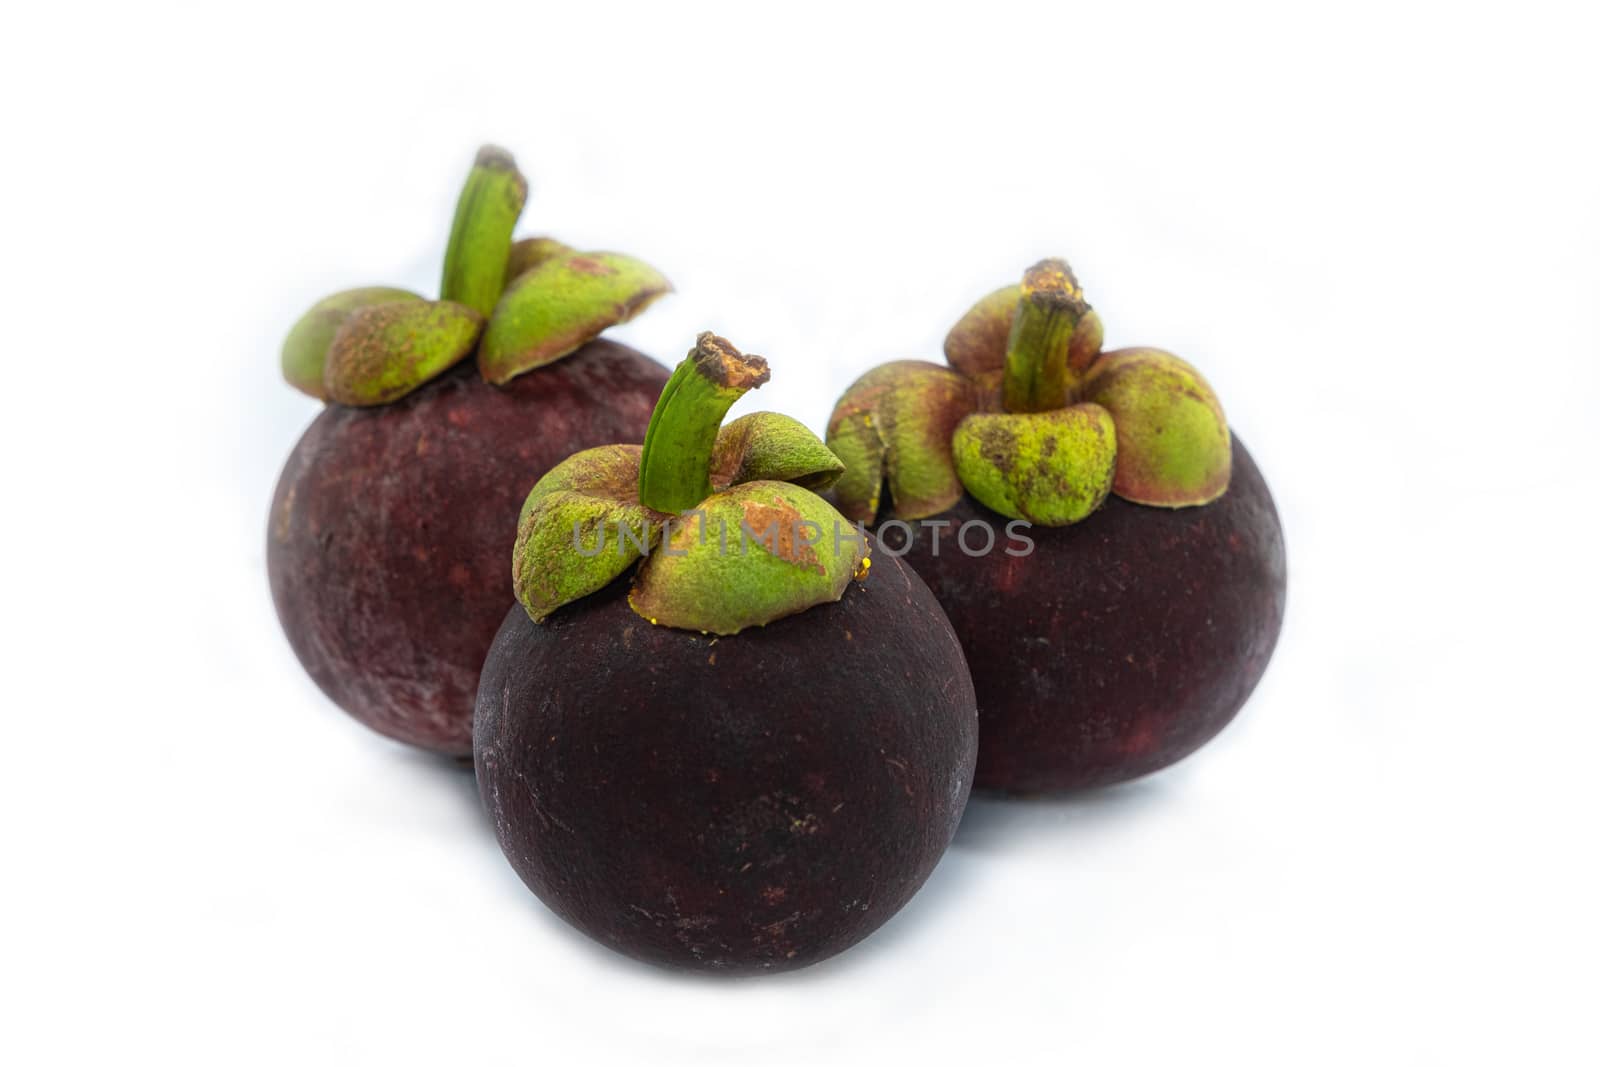 Mangosteen (Garcinia mangostana) is an exotic, tropical fruit with a slightly sweet and sour flavor, isolated on white background. by peerapixs